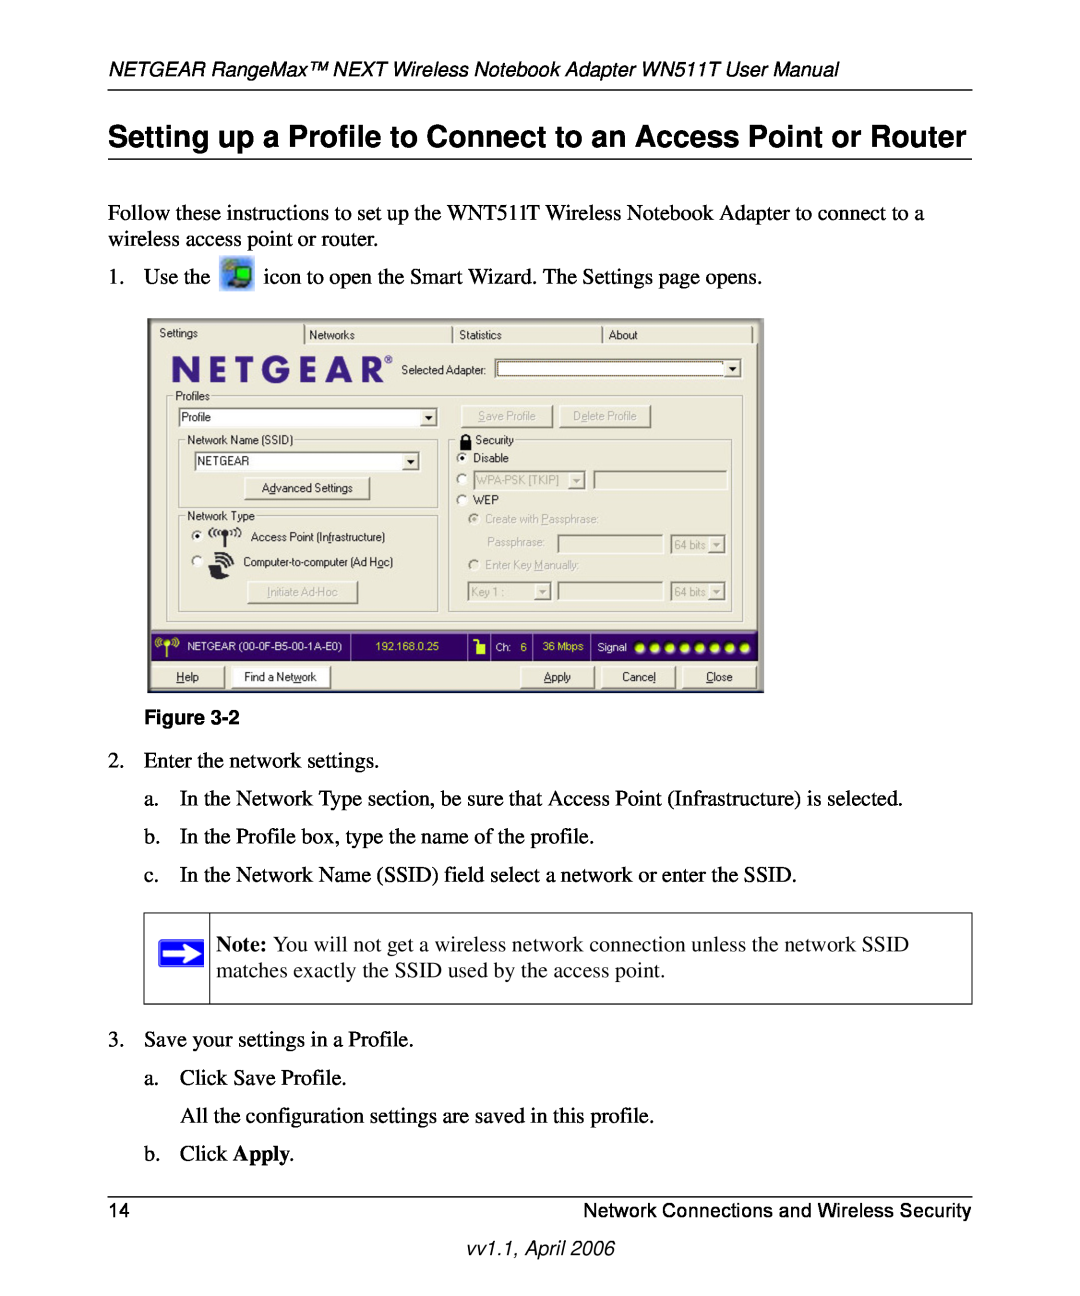 NETGEAR WN511T user manual Setting up a Profile to Connect to an Access Point or Router 